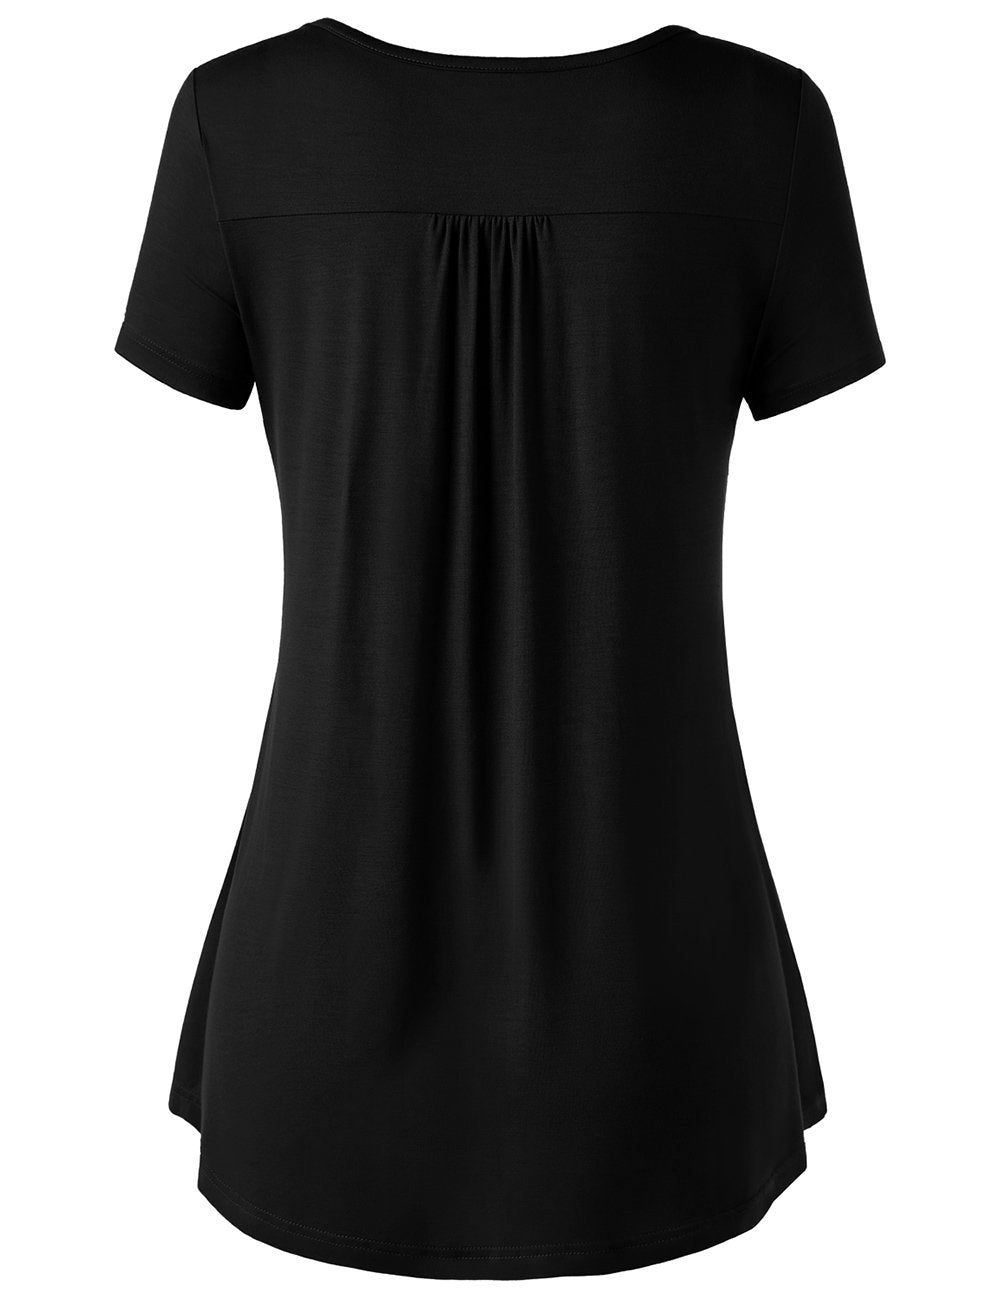 BAISHENGGT Women's Solid Black V Neck Flared Tunic Tops